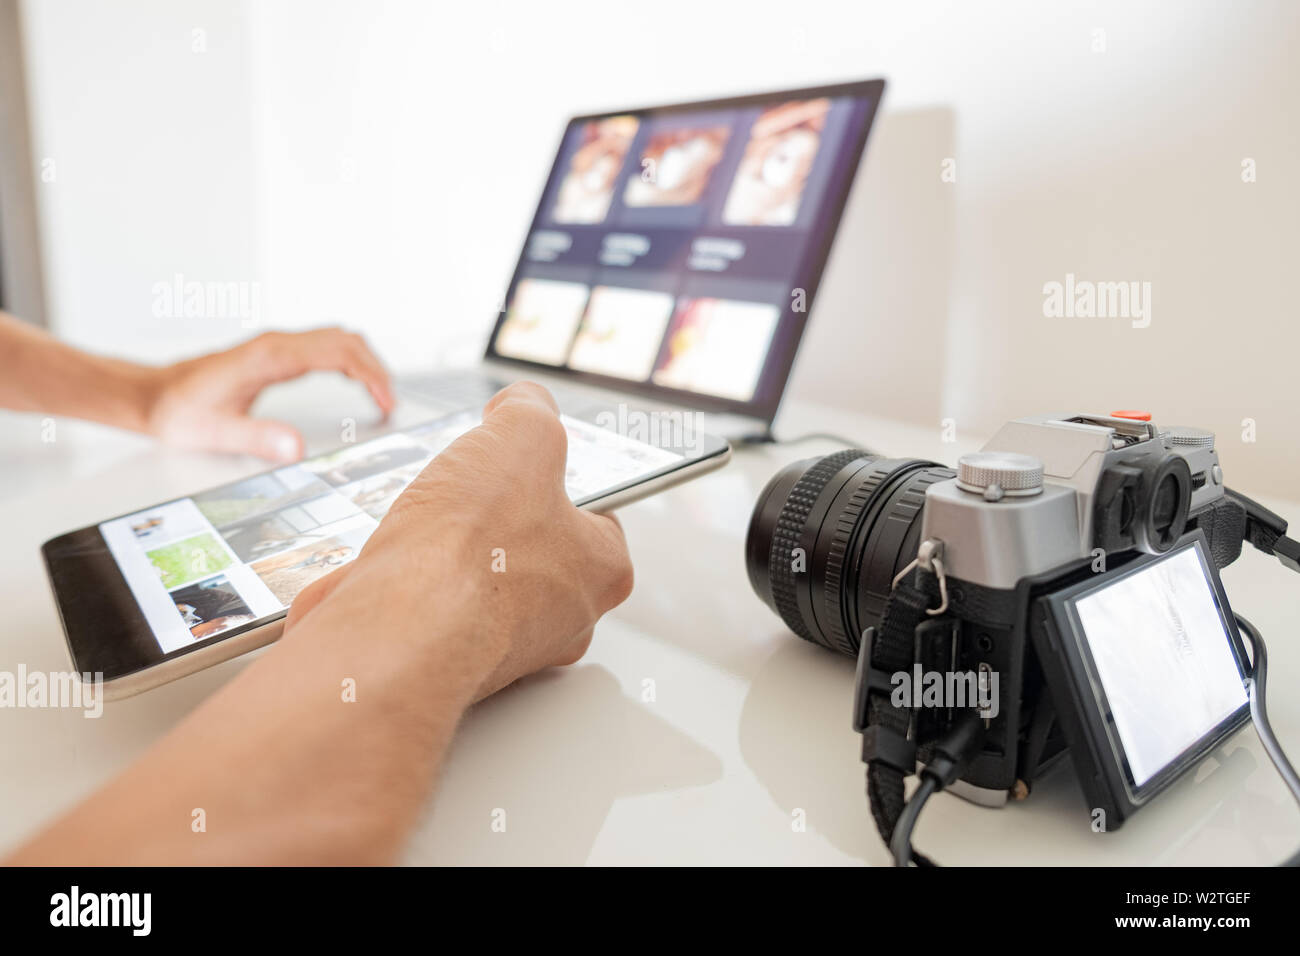 Managing digital images on a computer. Human hands hold a tablet to organise or import images from camera to laptop Stock Photo